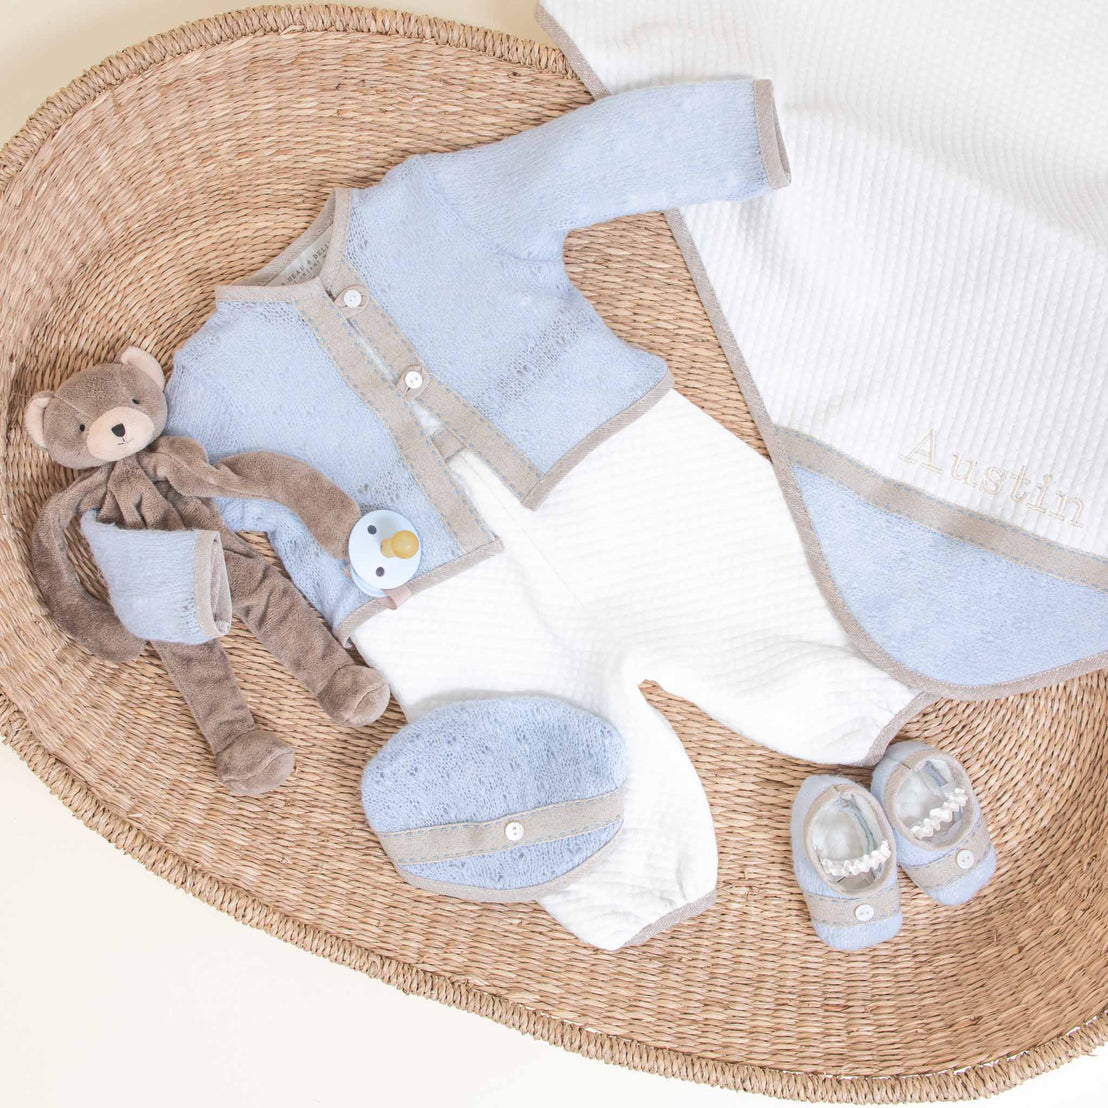 A collection of Austin Newborn Gift Set items laid out on a wicker mat, including an heirloom blue romper, a white personalized blanket with a name, a teddy bear, bib, and socks.